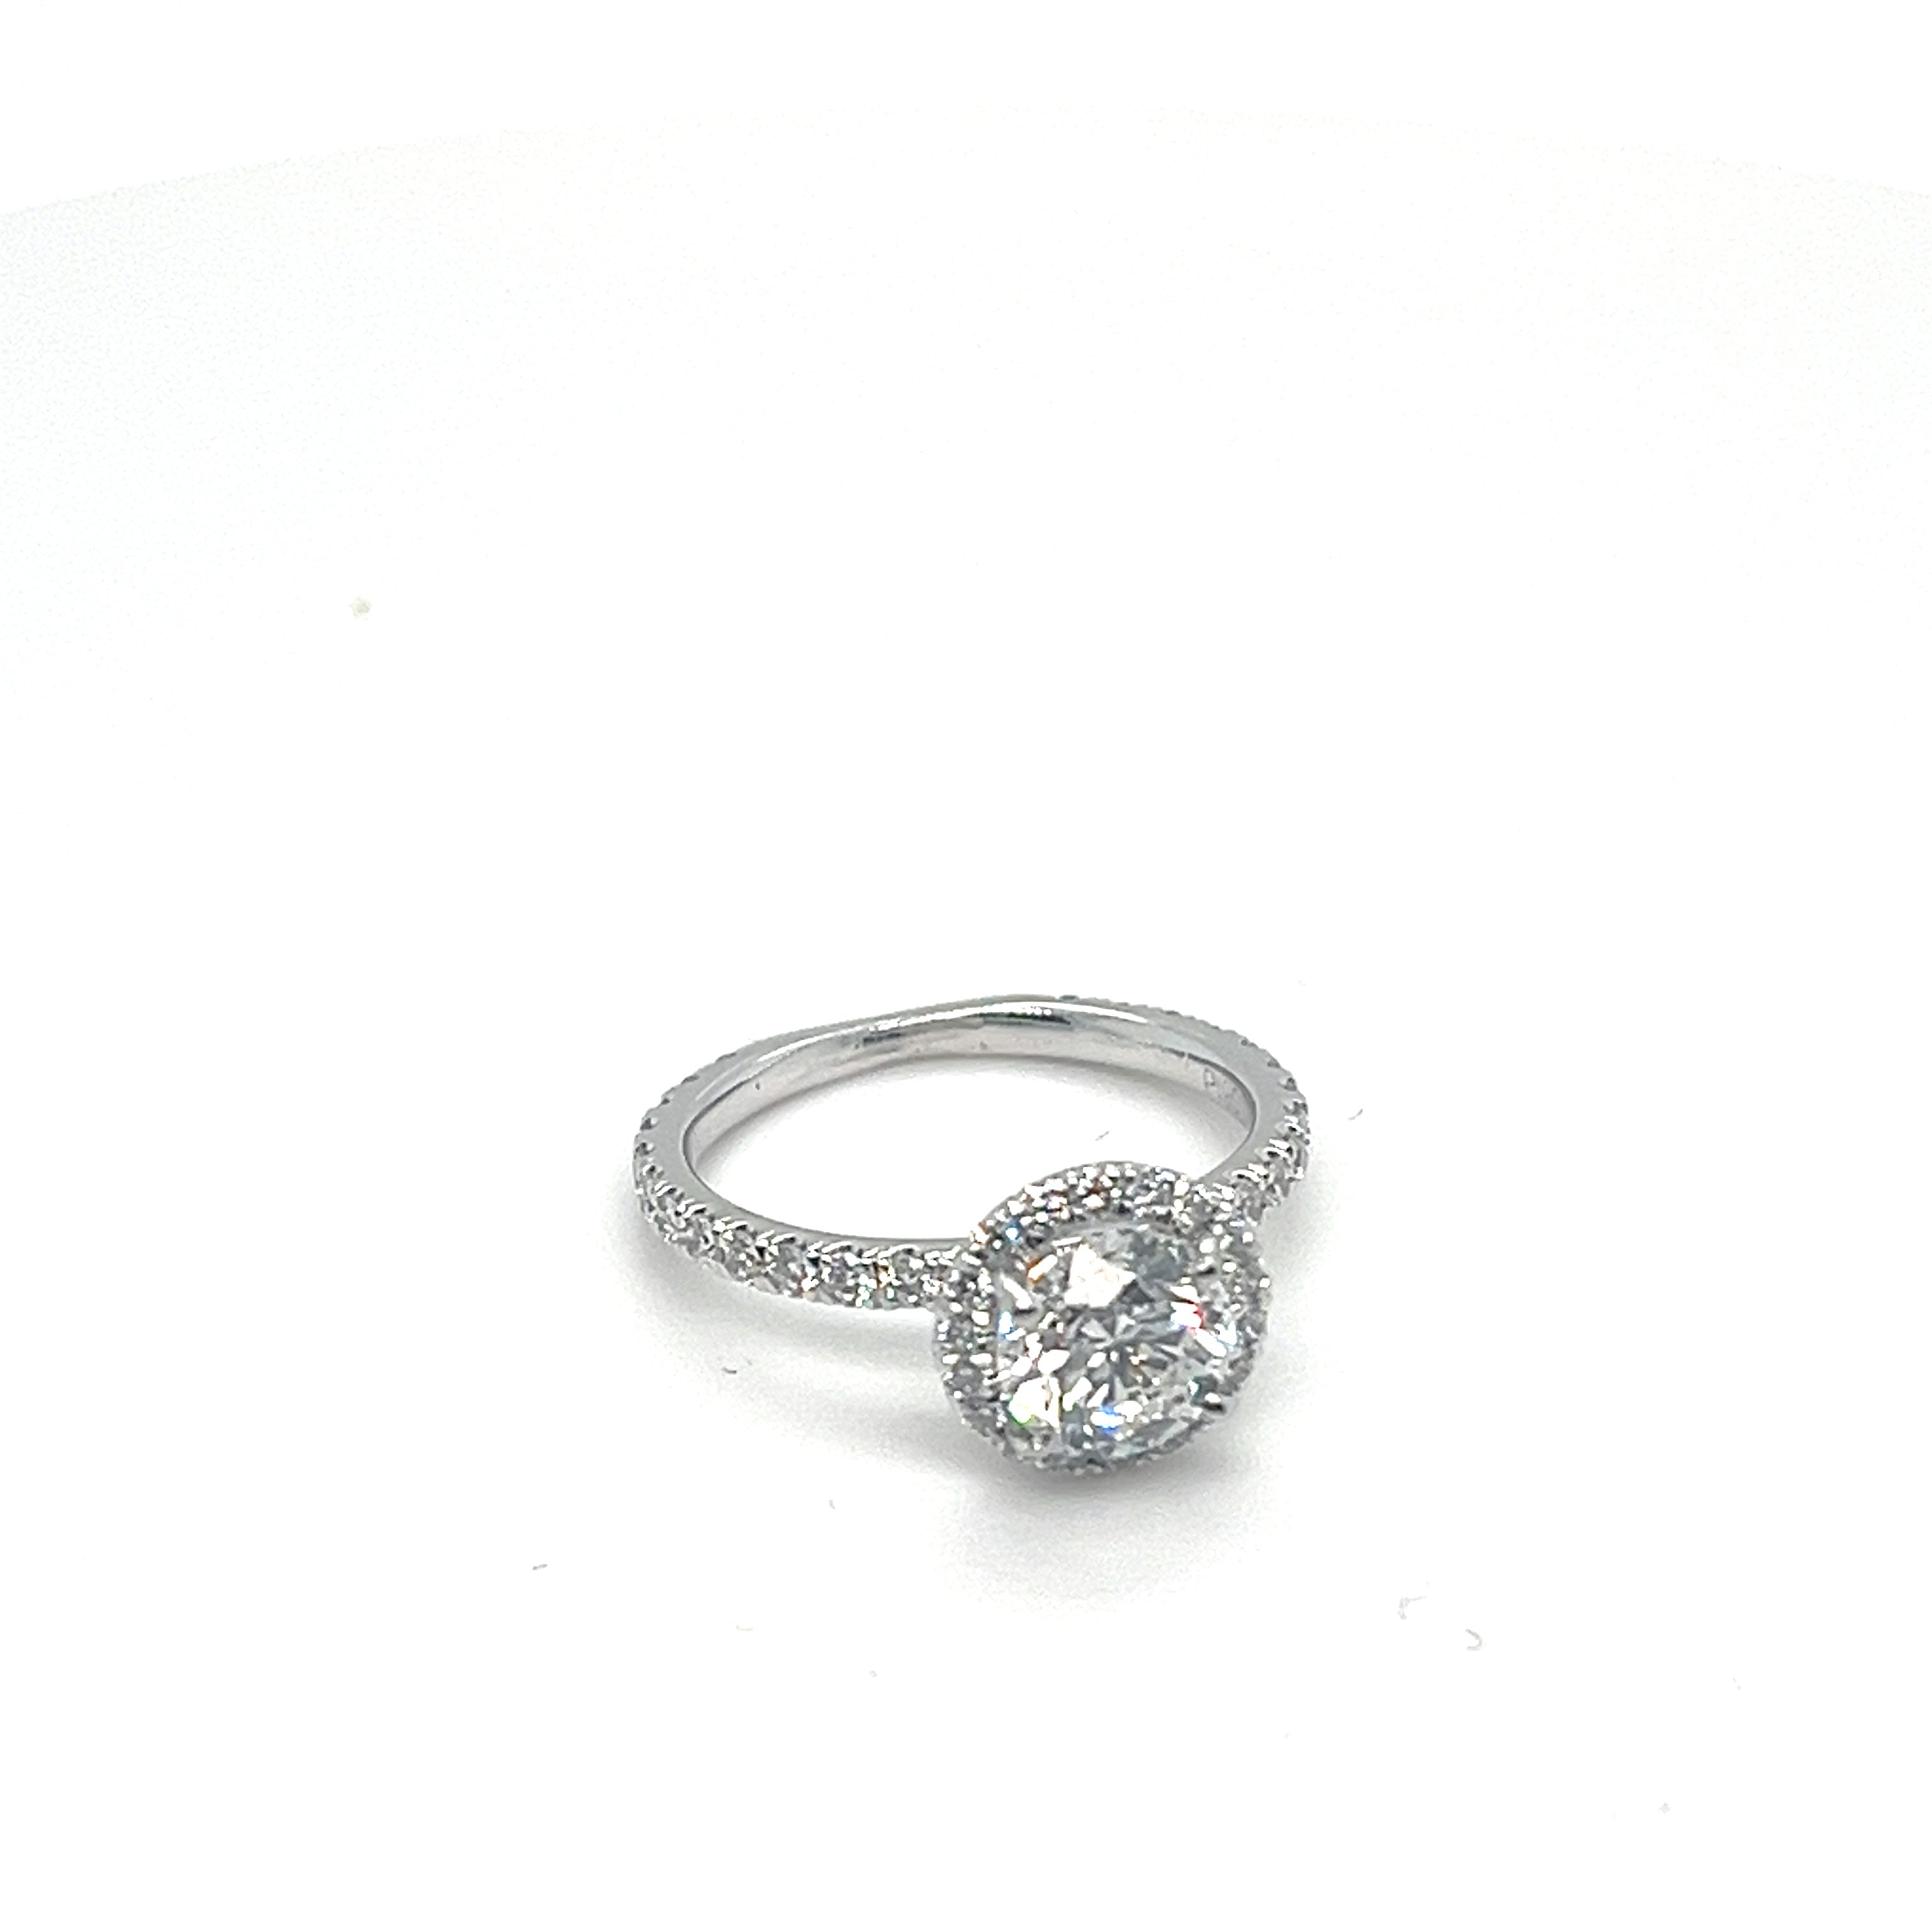 1.02CT BR F I1 NCT/ PLAT 0.53 CTW BR DIA HALO STYLE ENG RING 1.02CT BR F I1 *W*  6.21*6.24*4.